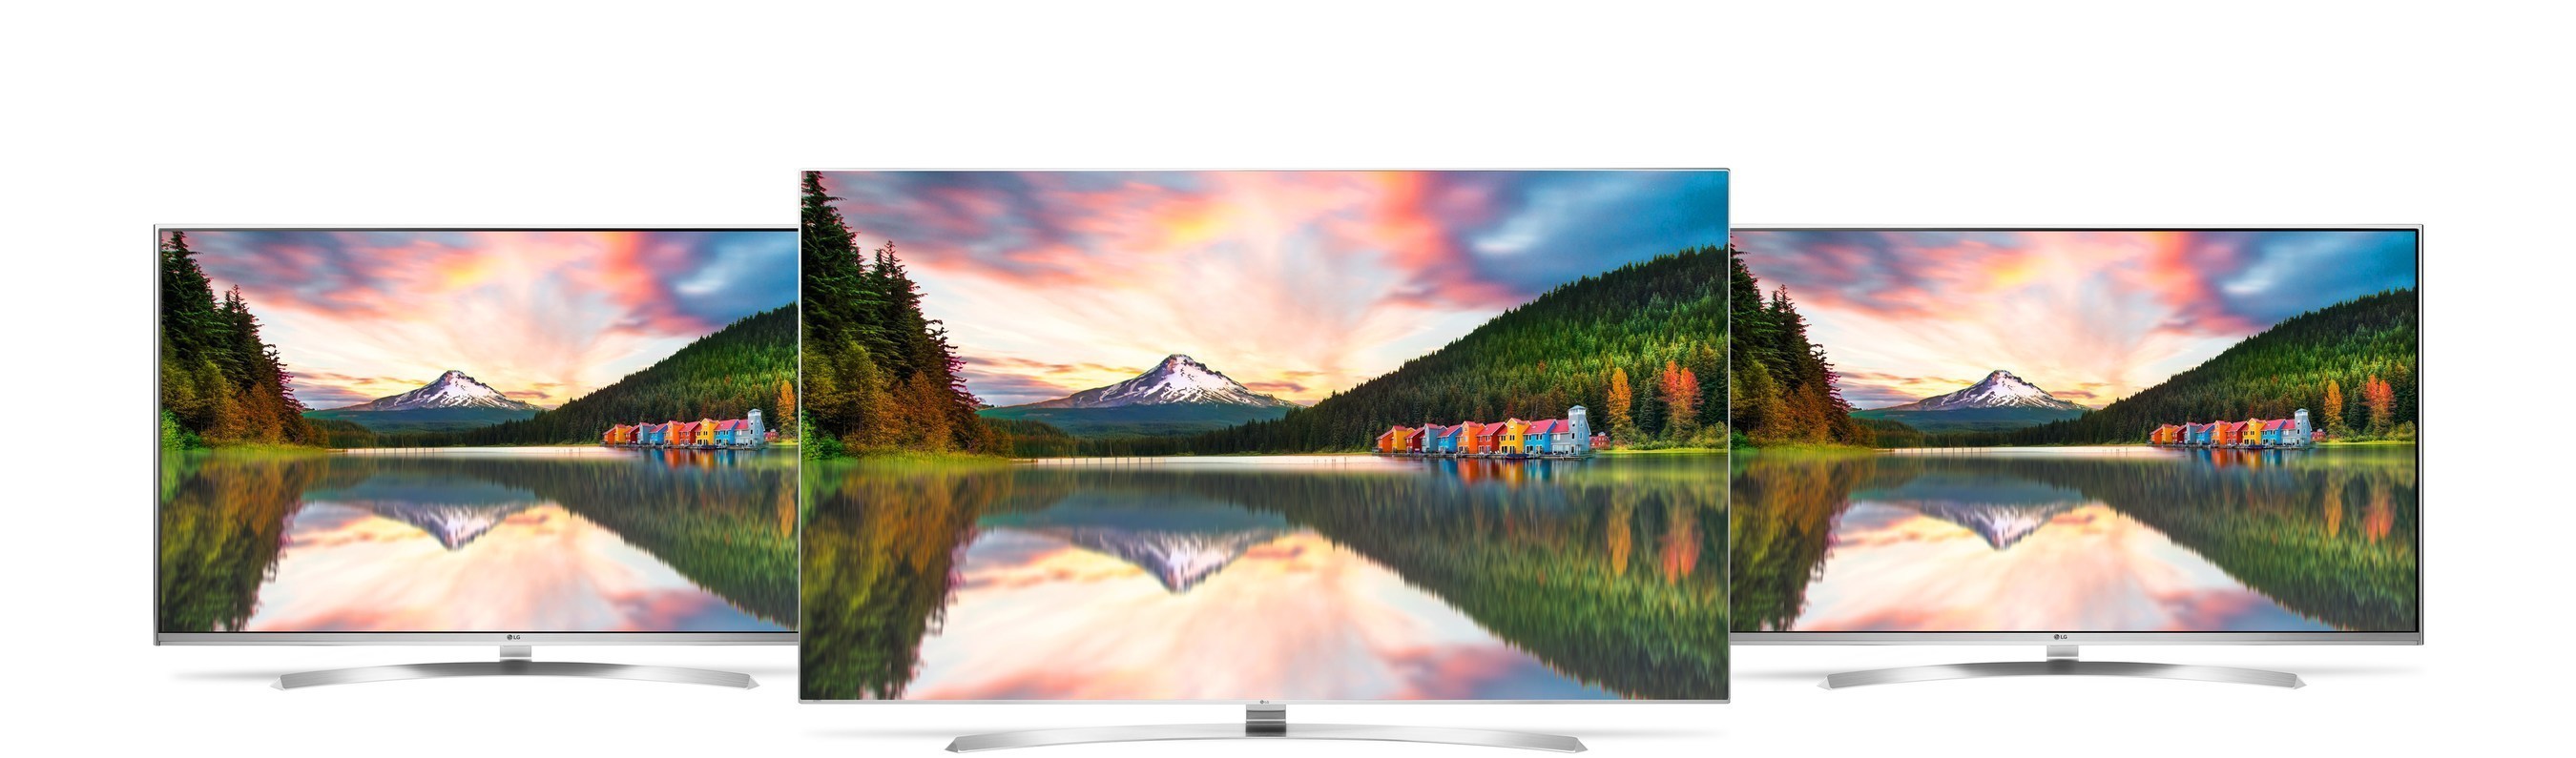 The LG SUPER UHD line for the U.S. boasts four series, including the UH9500, the UH8500 and the UH7700. The top-of-the-line UH9500, UH8500 and UH7700 LG SUPER UHD series boast an advanced IPS display with innovations such as True Black Panel and Contrast Maximizer for advanced picture quality at wide viewing angles.